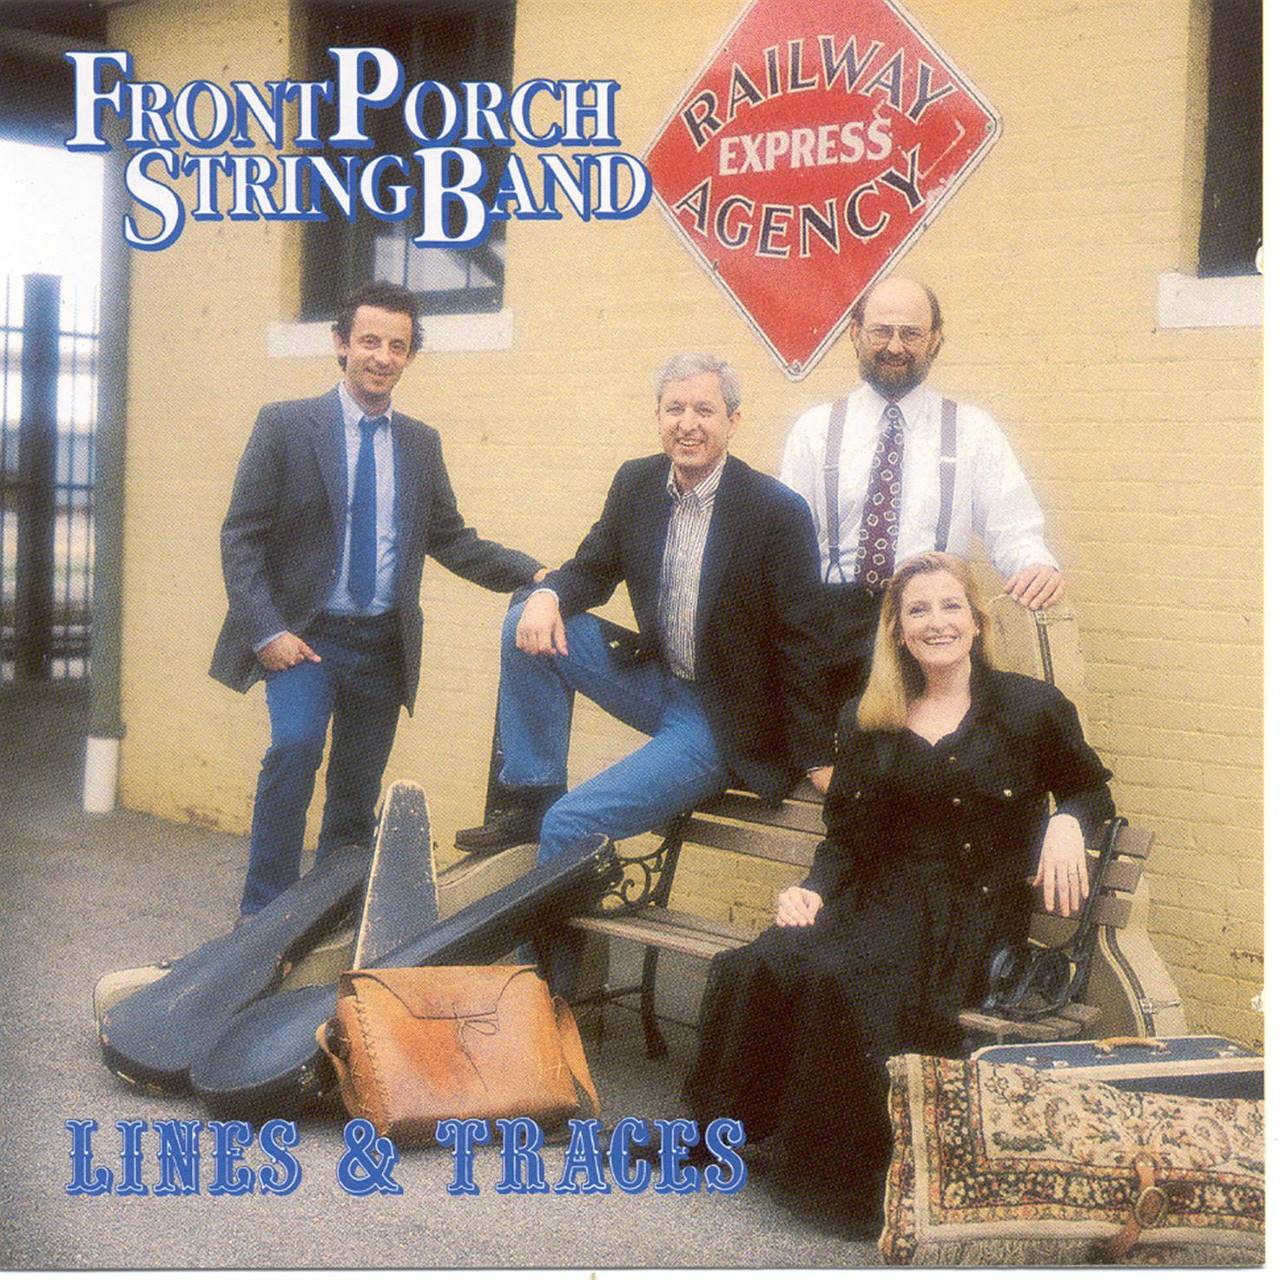 Front Porch String Band - Lines & Traces cover album